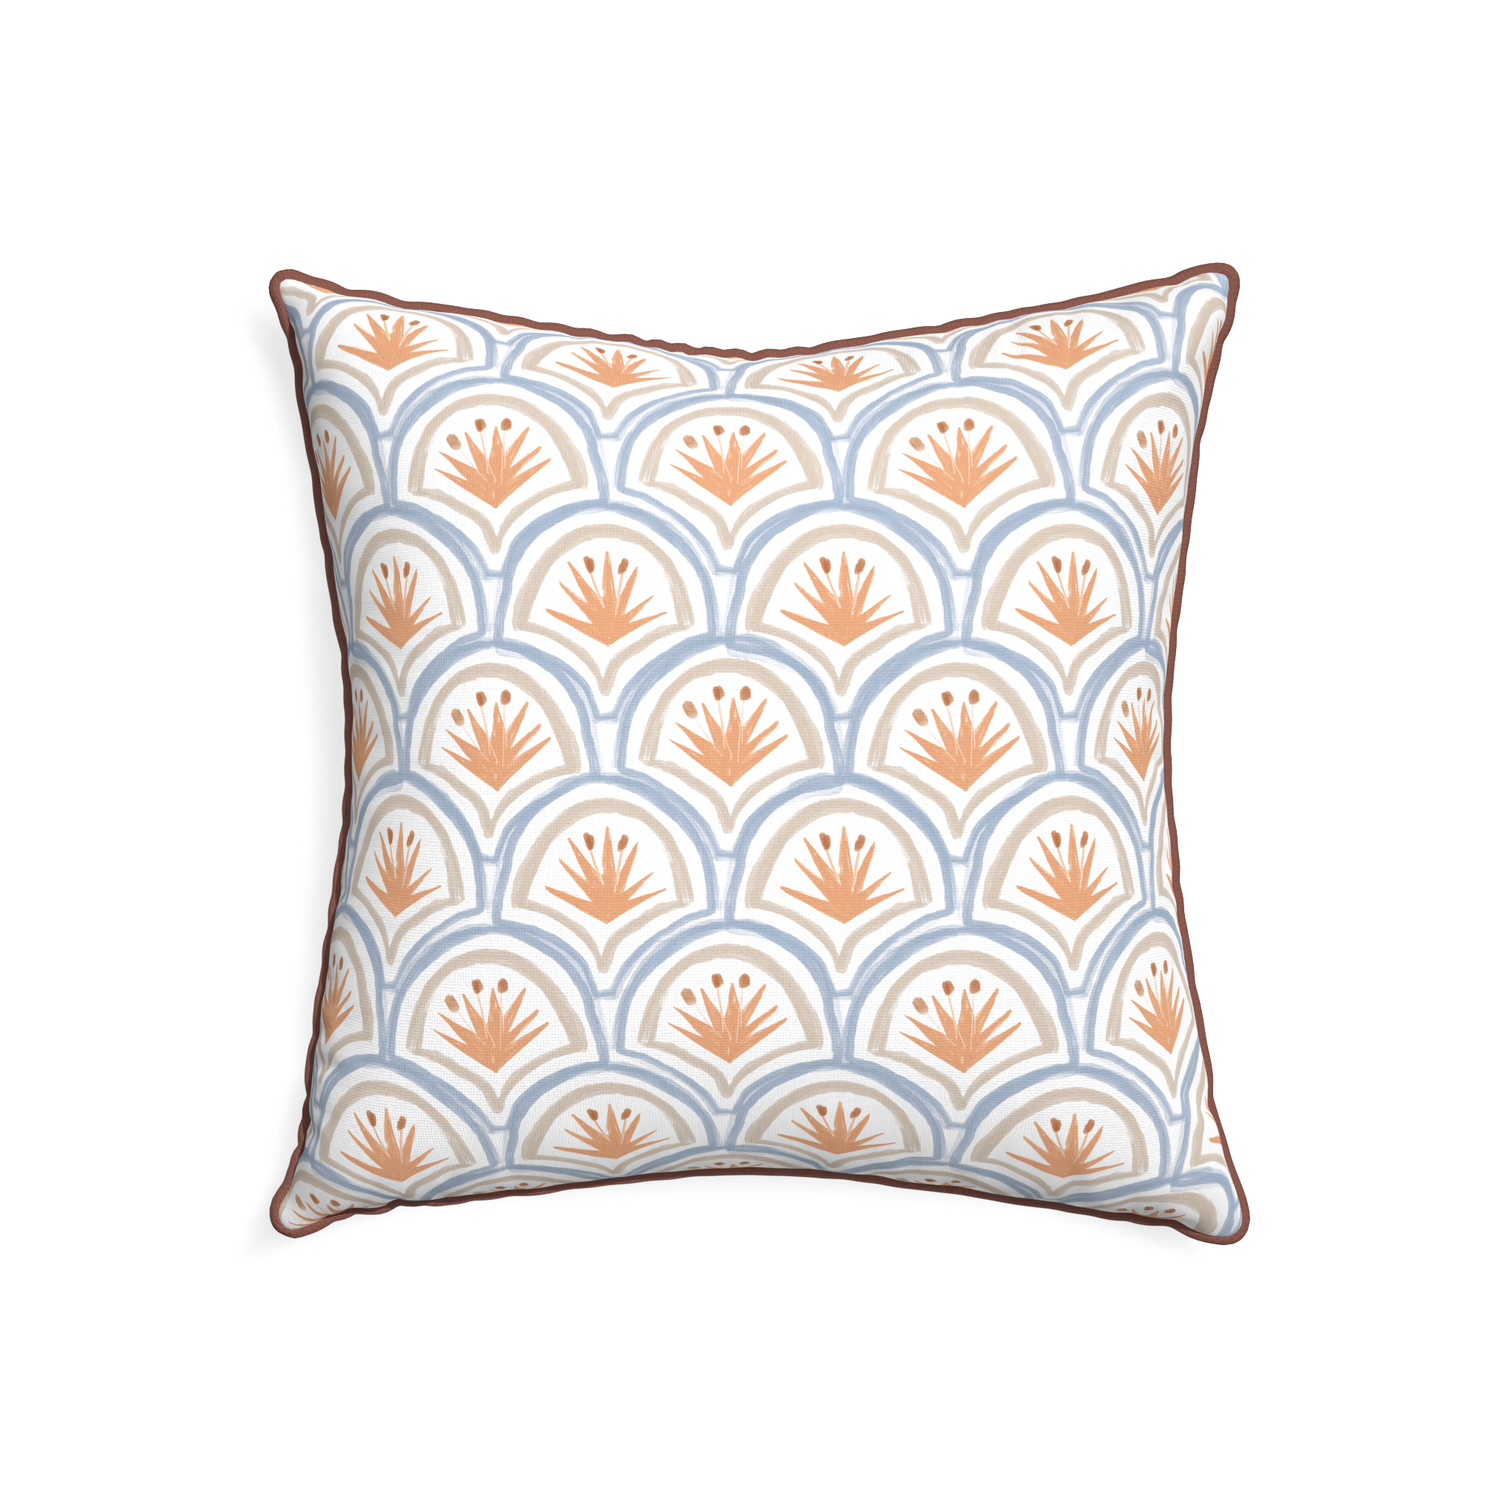 22-square thatcher apricot custom art deco palm patternpillow with w piping on white background